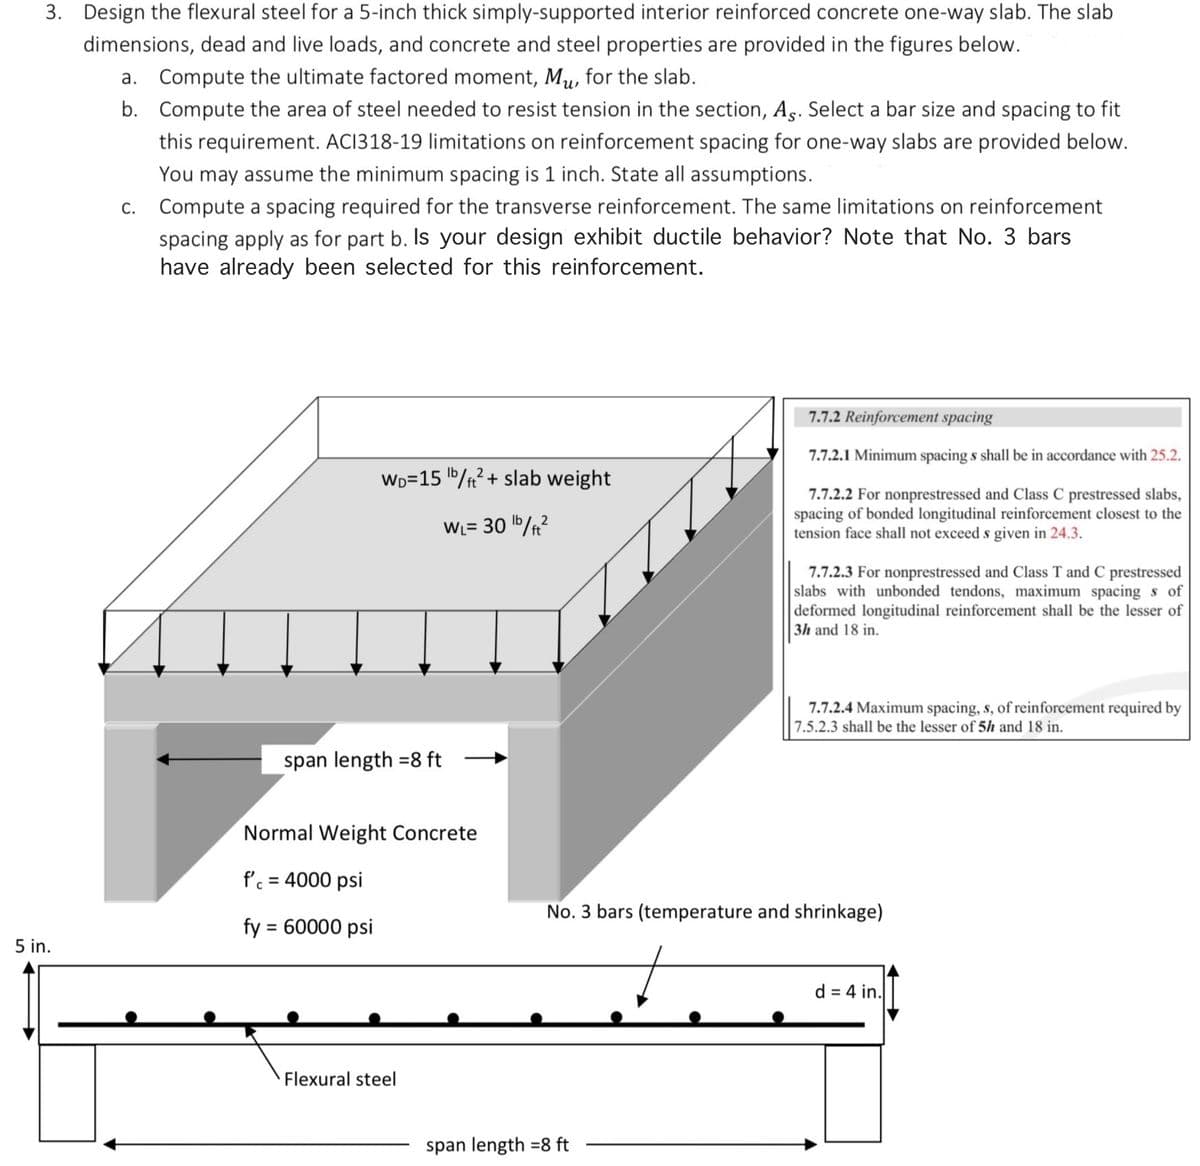 3. Design the flexural steel for a 5-inch thick simply-supported interior reinforced concrete one-way slab. The slab
dimensions, dead and live loads, and concrete and steel properties are provided in the figures below.
a. Compute the ultimate factored moment, Mu, for the slab.
b. Compute the area of steel needed to resist tension in the section, As. Select a bar size and spacing to fit
this requirement. ACI318-19 limitations on reinforcement spacing for one-way slabs are provided below.
You may assume the minimum spacing is 1 inch. State all assumptions.
5 in.
c. Compute a spacing required for the transverse reinforcement. The same limitations on reinforcement
spacing apply as for part b. Is your design exhibit ductile behavior? Note that No. 3 bars
have already been selected for this reinforcement.
WD=15 b/ft² + slab weight
WL= 30¹b/ft²
span length 8 ft
Normal Weight Concrete
f'c = 4000 psi
fy = 60000 psi
Flexural steel
7.7.2 Reinforcement spacing
7.7.2.1 Minimum spacing s shall be in accordance with 25.2.
7.7.2.2 For nonprestressed and Class C prestressed slabs,
spacing of bonded longitudinal reinforcement closest to the
tension face shall not exceed s given in 24.3.
span length 8 ft
7.7.2.3 For nonprestressed and Class T and C prestressed
slabs with unbonded tendons, maximum spacing s of
deformed longitudinal reinforcement shall be the lesser of
3h and 18 in.
7.7.2.4 Maximum spacing, s, of reinforcement required by
7.5.2.3 shall be the lesser of 5h and 18 in.
No. 3 bars (temperature and shrinkage)
d = 4 in.